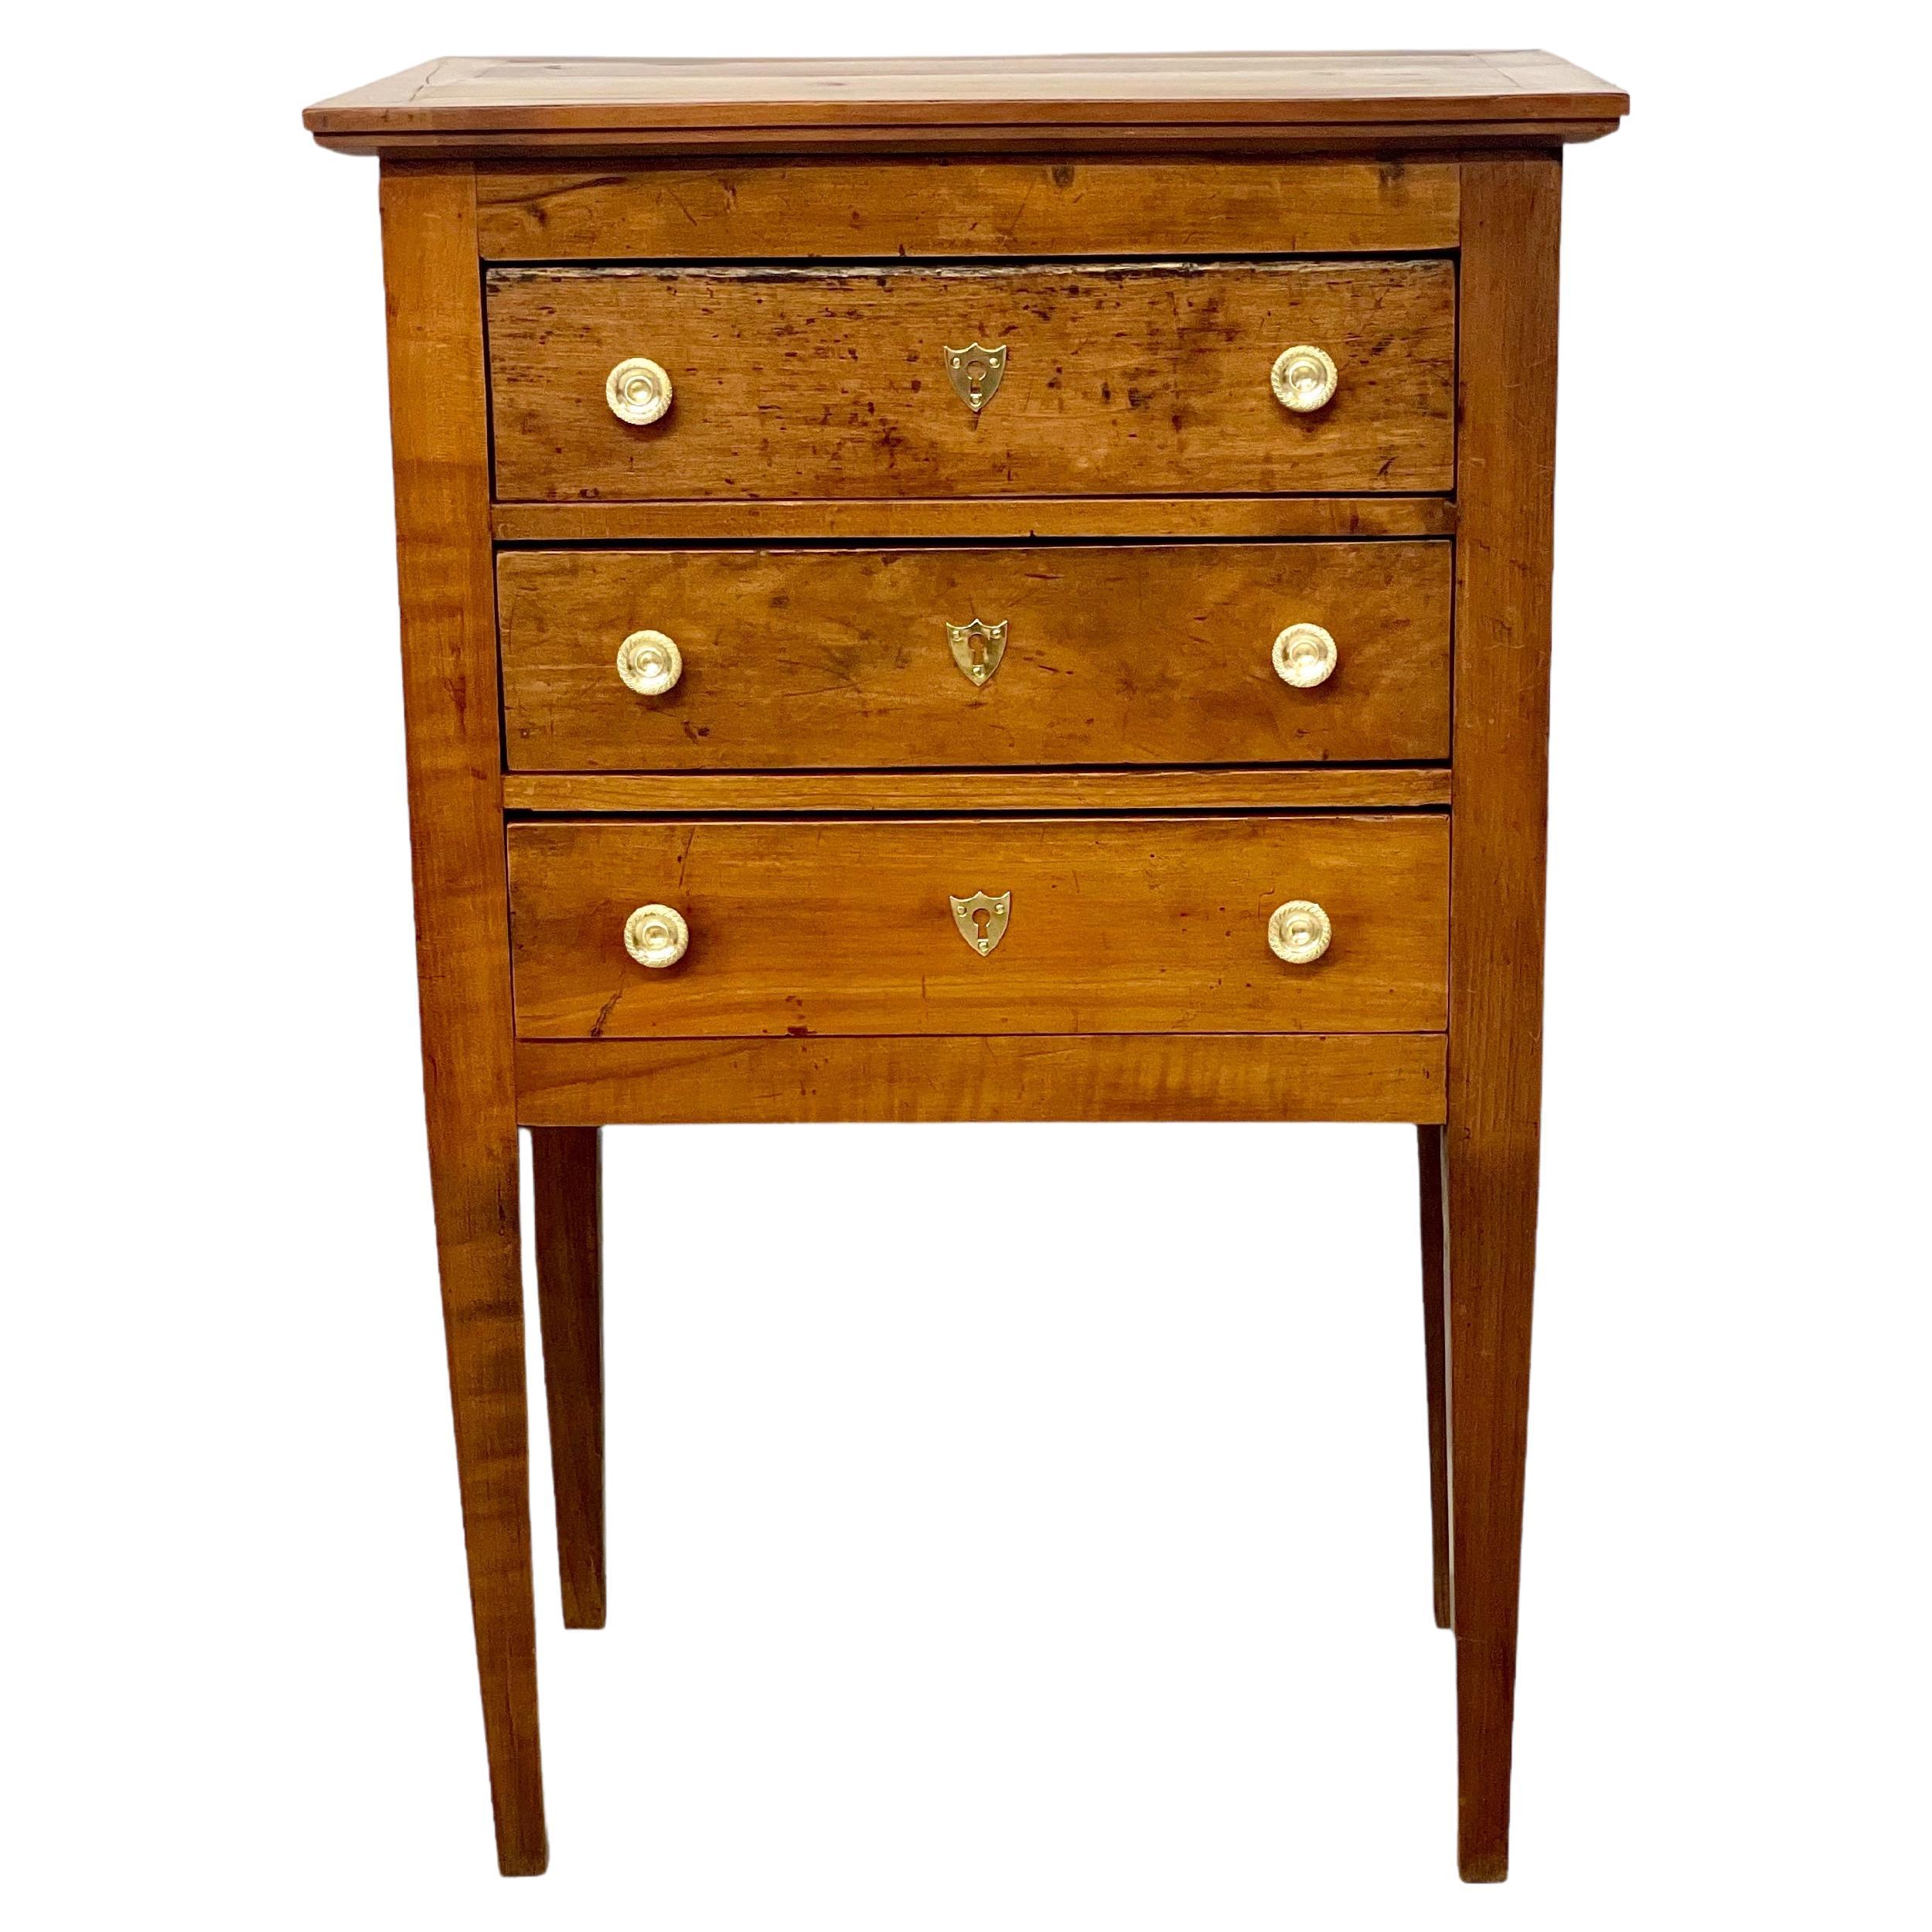 19th Century French Walnut Chest of Drawers or 'Chiffonnier' For Sale